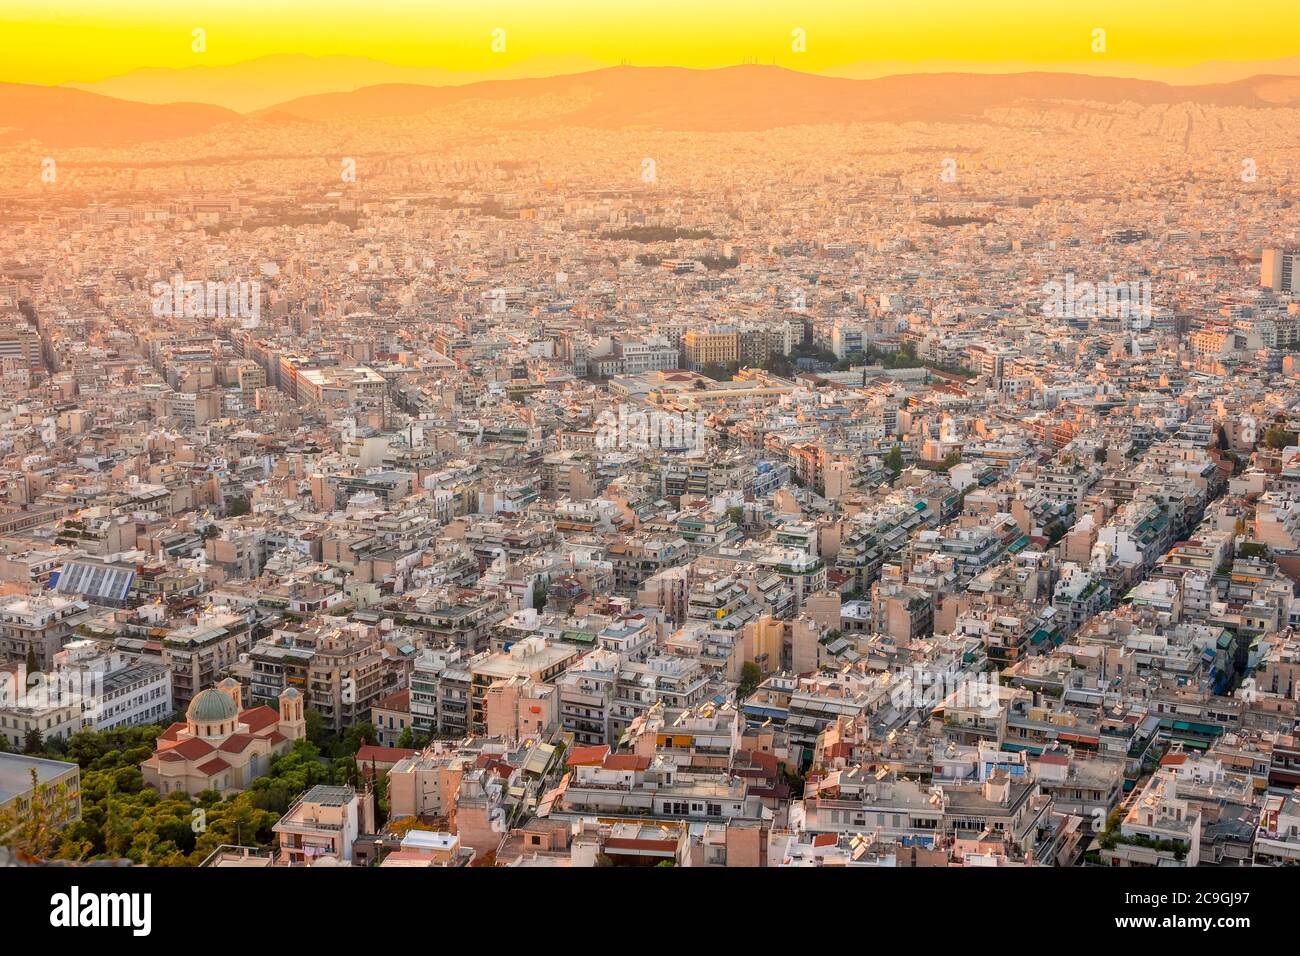 Greece. Warm summer evening over the rooftops of Athens. Residential buildings and narrow streets. Domes of the cathedral with green parks. Aerial vie Stock Photo